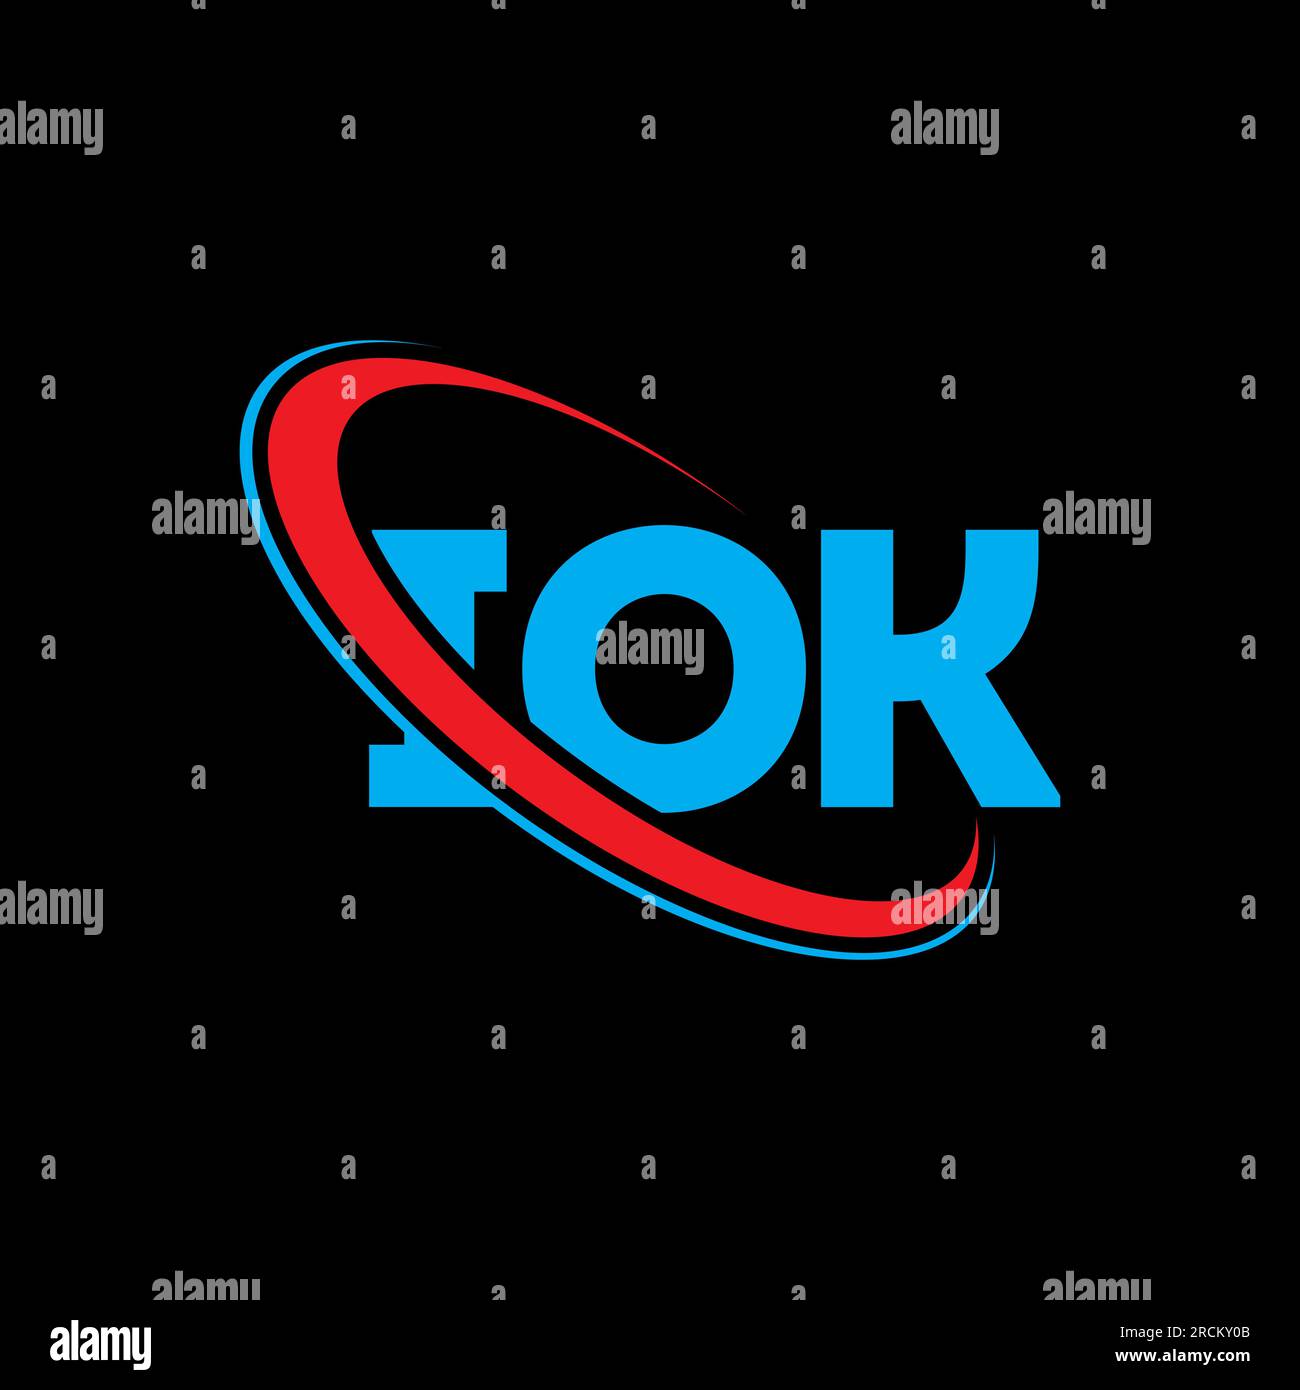 IOK logo. IOK letter. IOK letter logo design. Initials IOK logo linked with circle and uppercase monogram logo. IOK typography for technology, busines Stock Vector